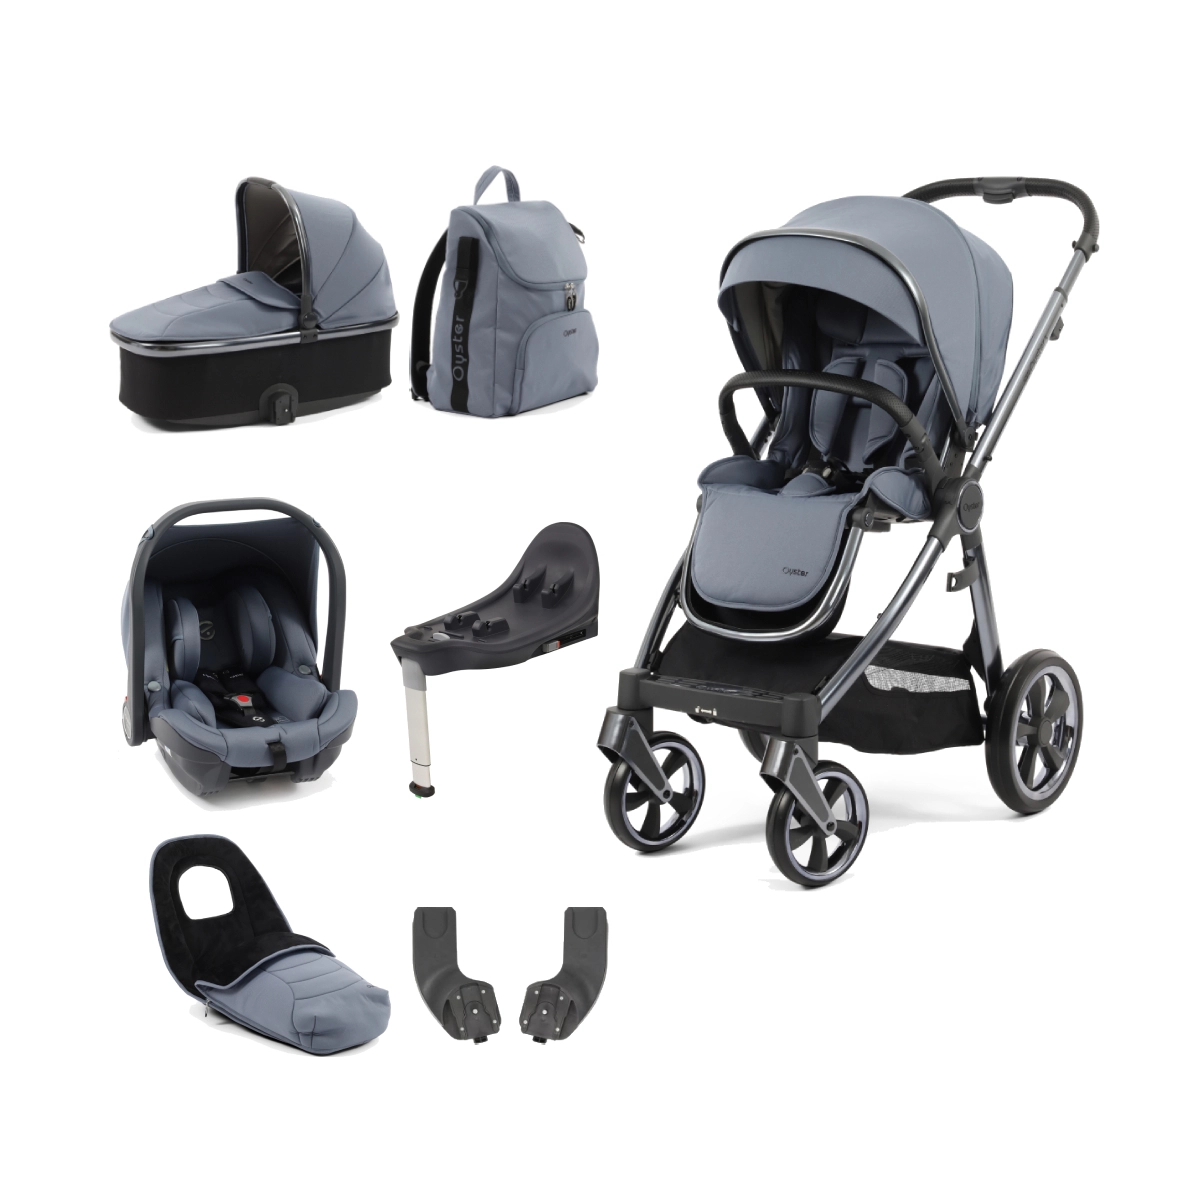 BabyStyle Oyster 3 Gun Metal Chassis 7 Piece Luxury Travel System